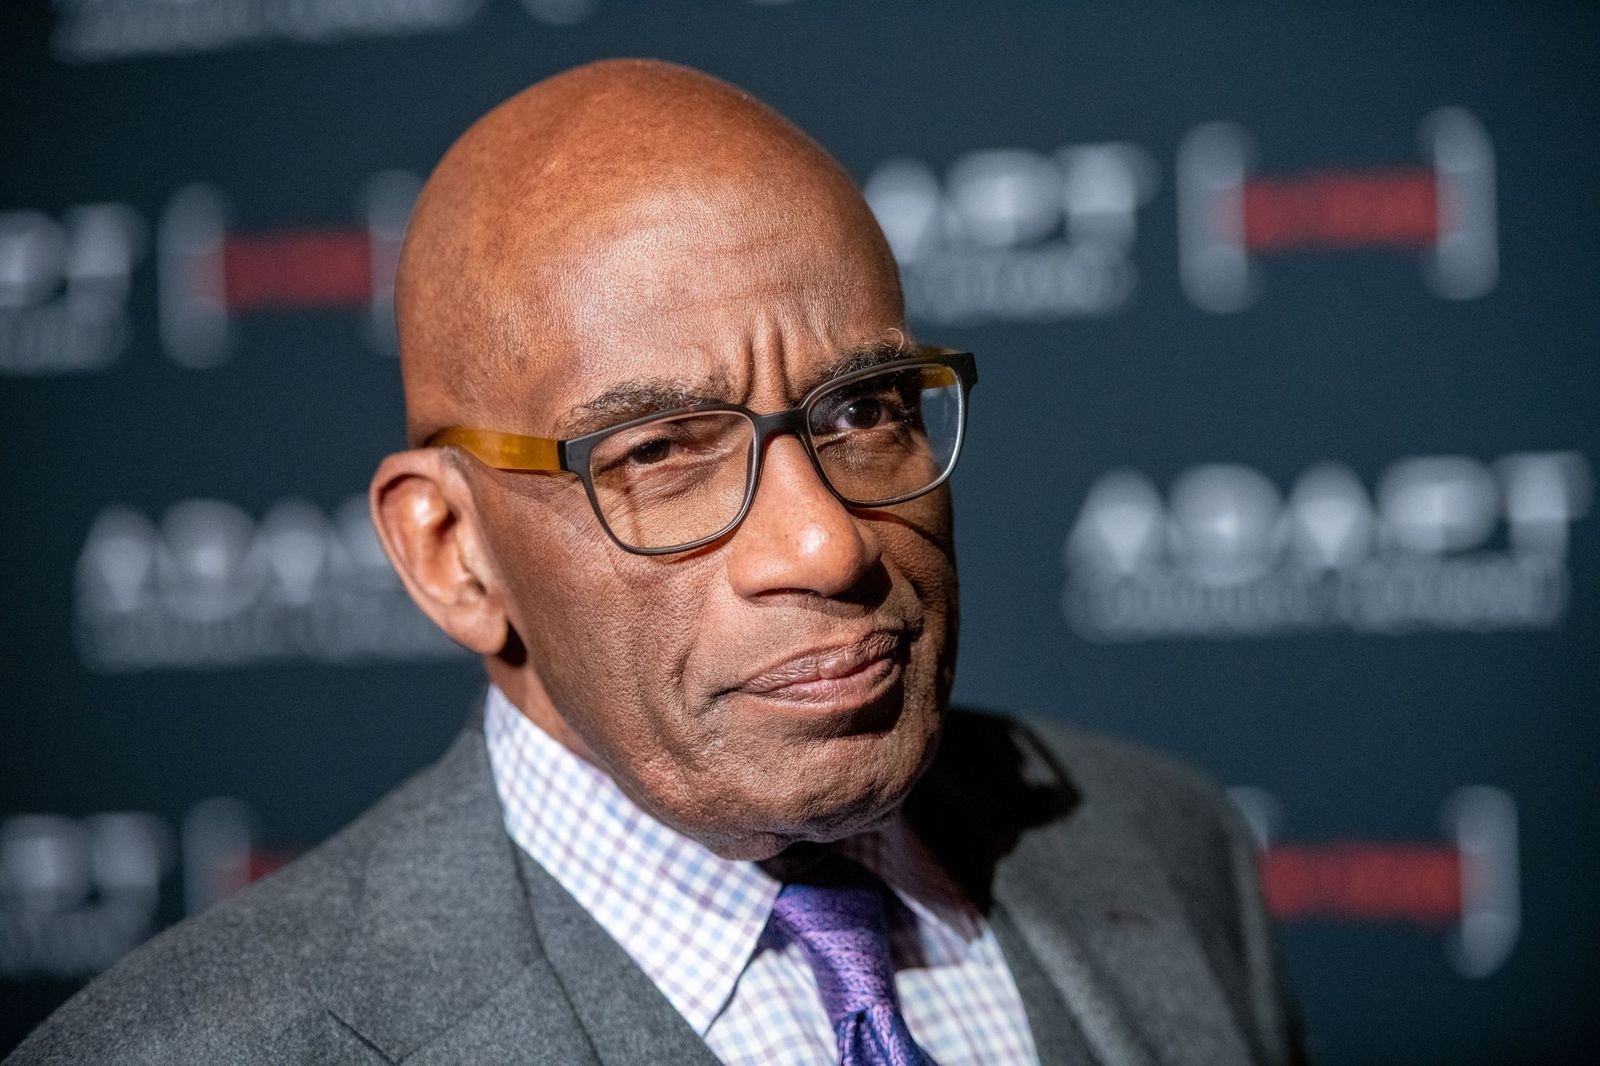 Al Roker at the 2019 Adapt Leadership Awards on March 14, 2019 in New York | Getty Images